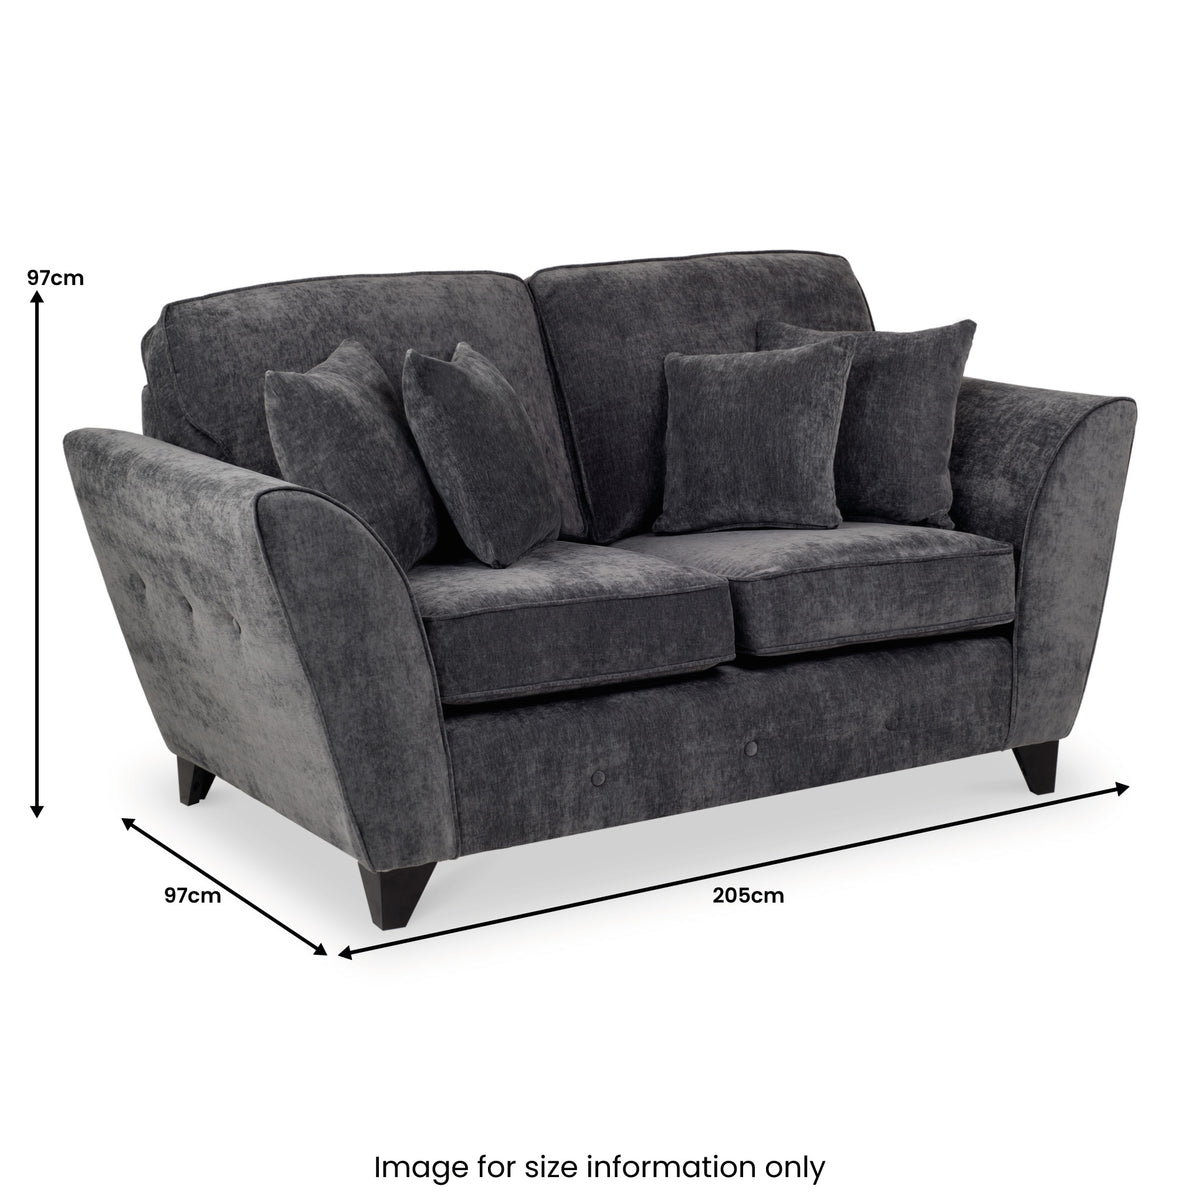 Harris 3 Seater Sofa in Charcoal Size Guide by Roseland Furniture